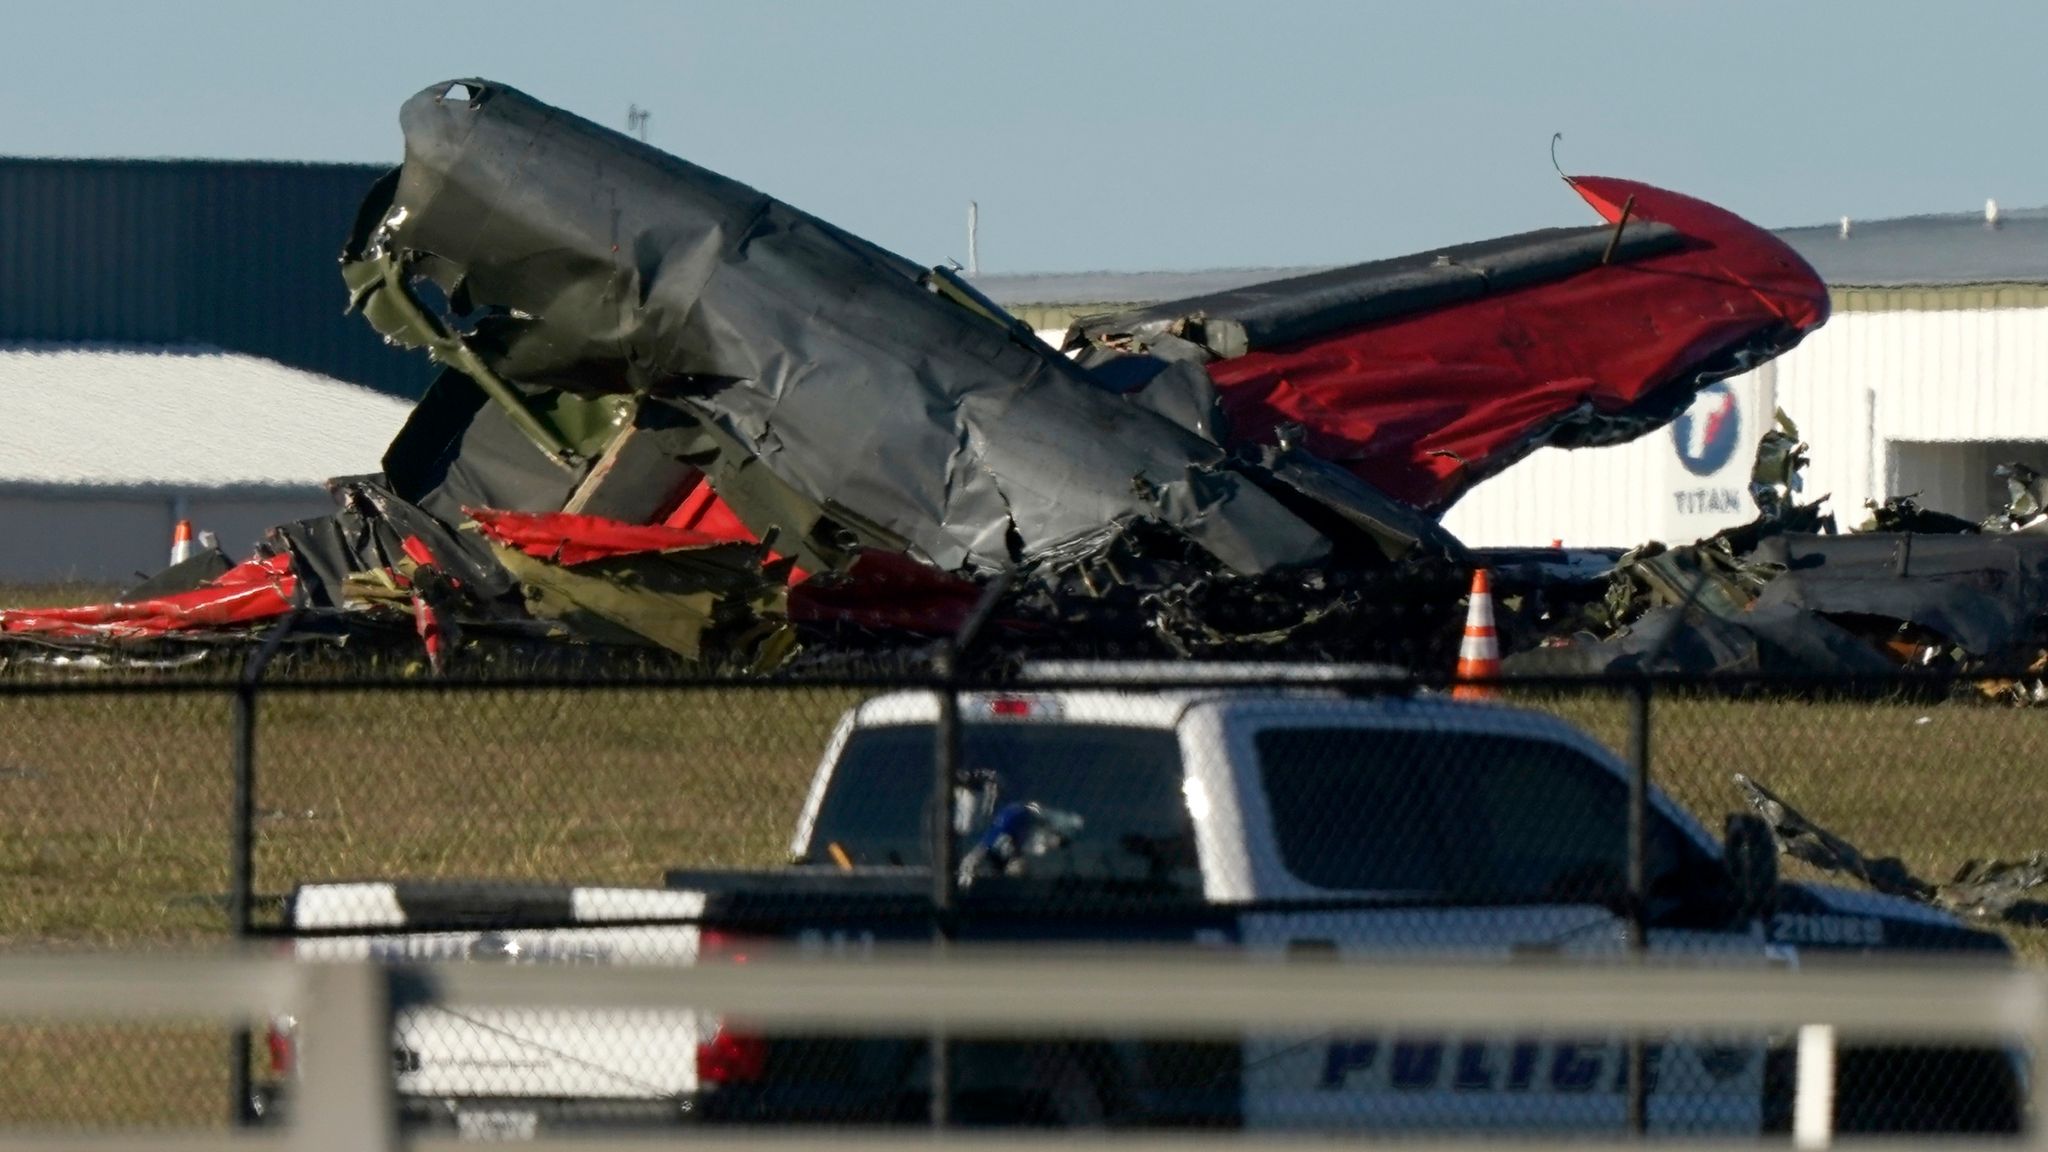 Six dead after World War Two planes collide at Dallas airshow US News